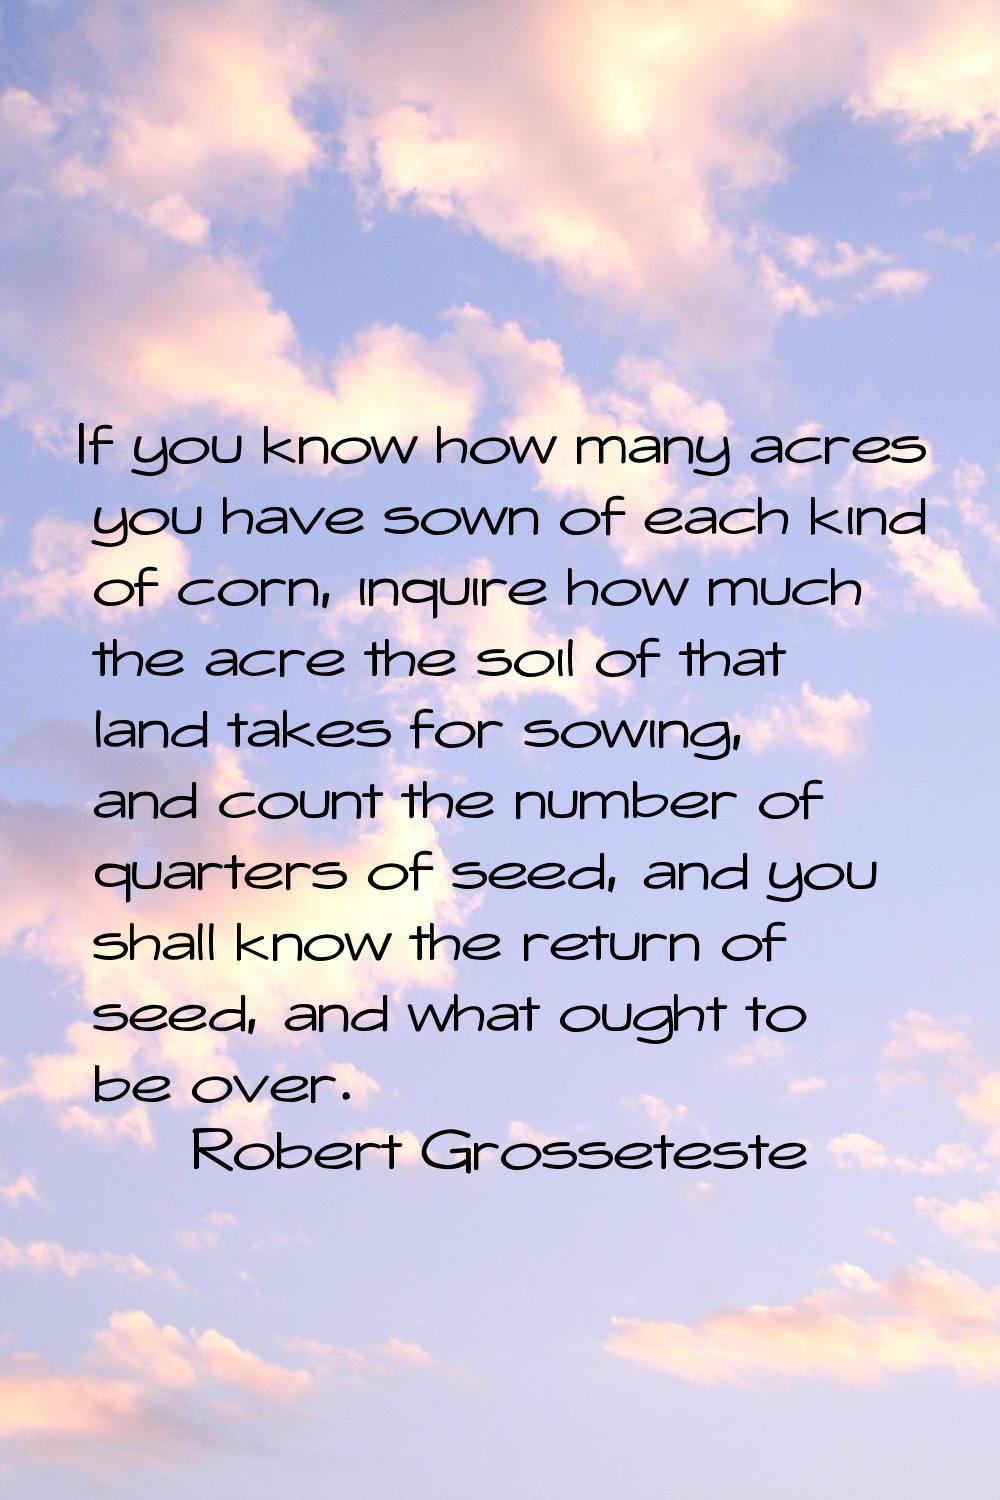 If you know how many acres you have sown of each kind of corn, inquire how much the acre the soil o